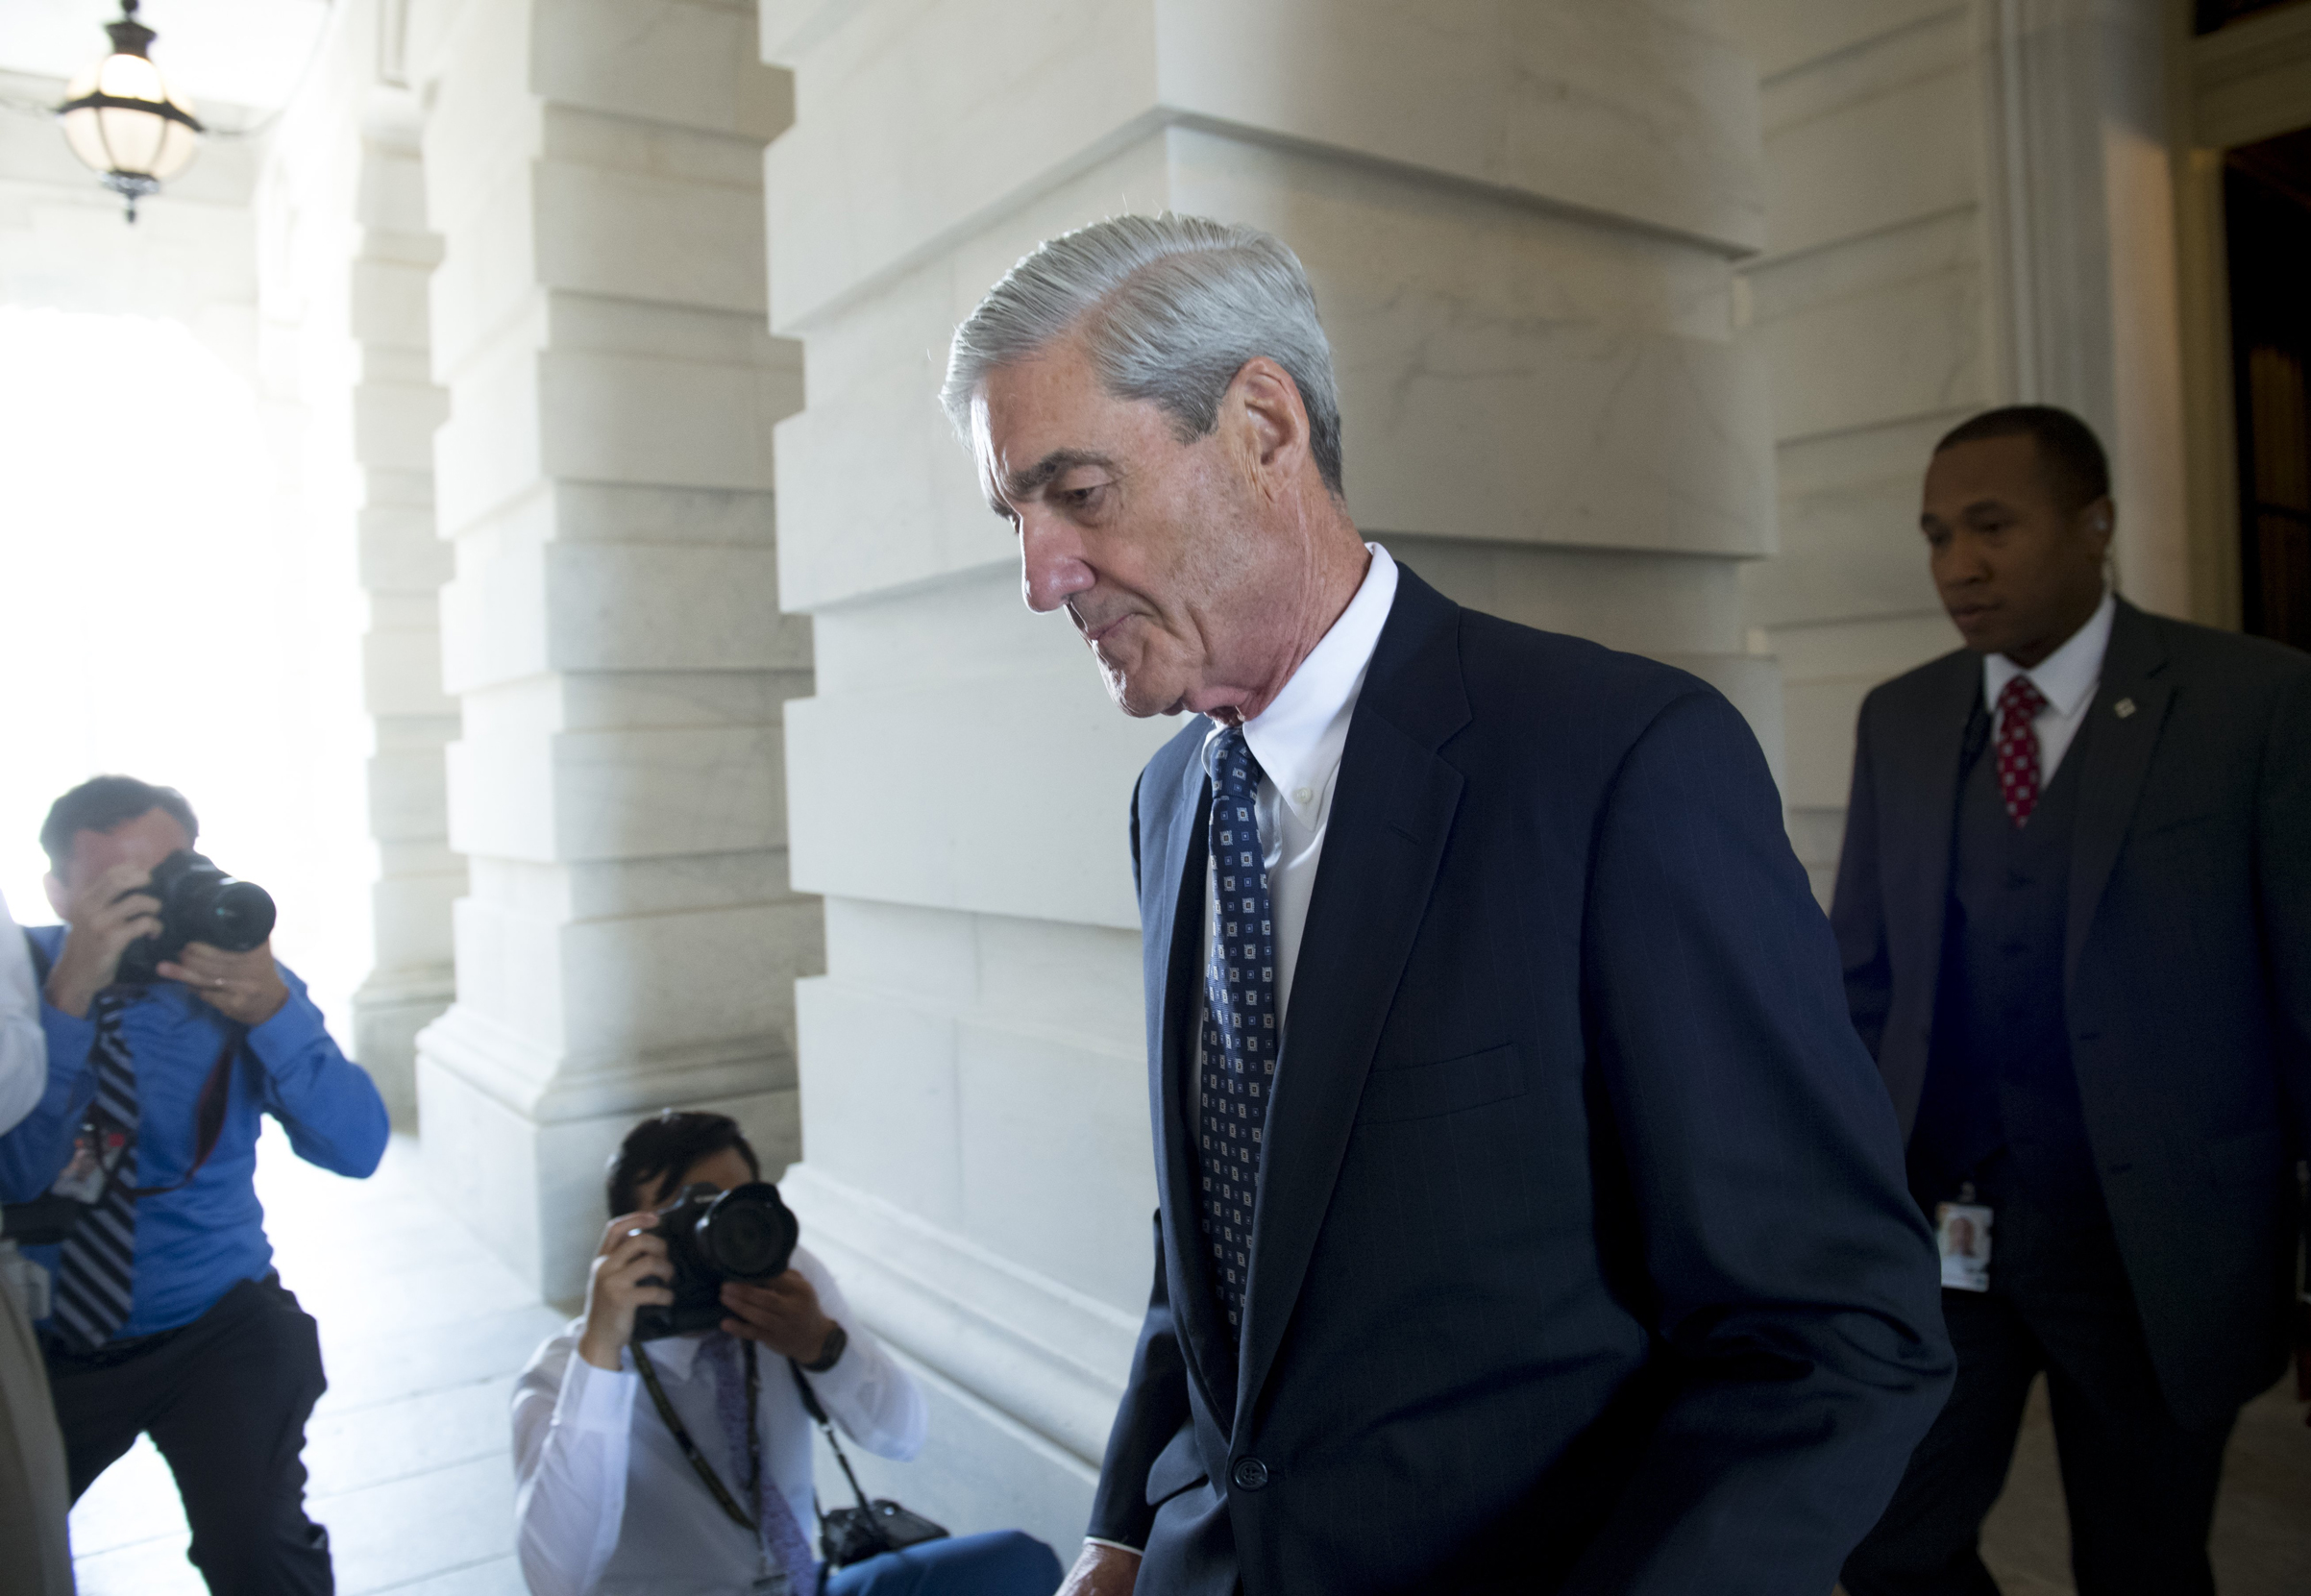 Robert Mueller leaves following a meeting with members of the U.S. Senate Judiciary Committee at the U.S. Capitol in Washington, D.C., on June 21, 2017. (Saul Loeb—AFP/Getty Images)